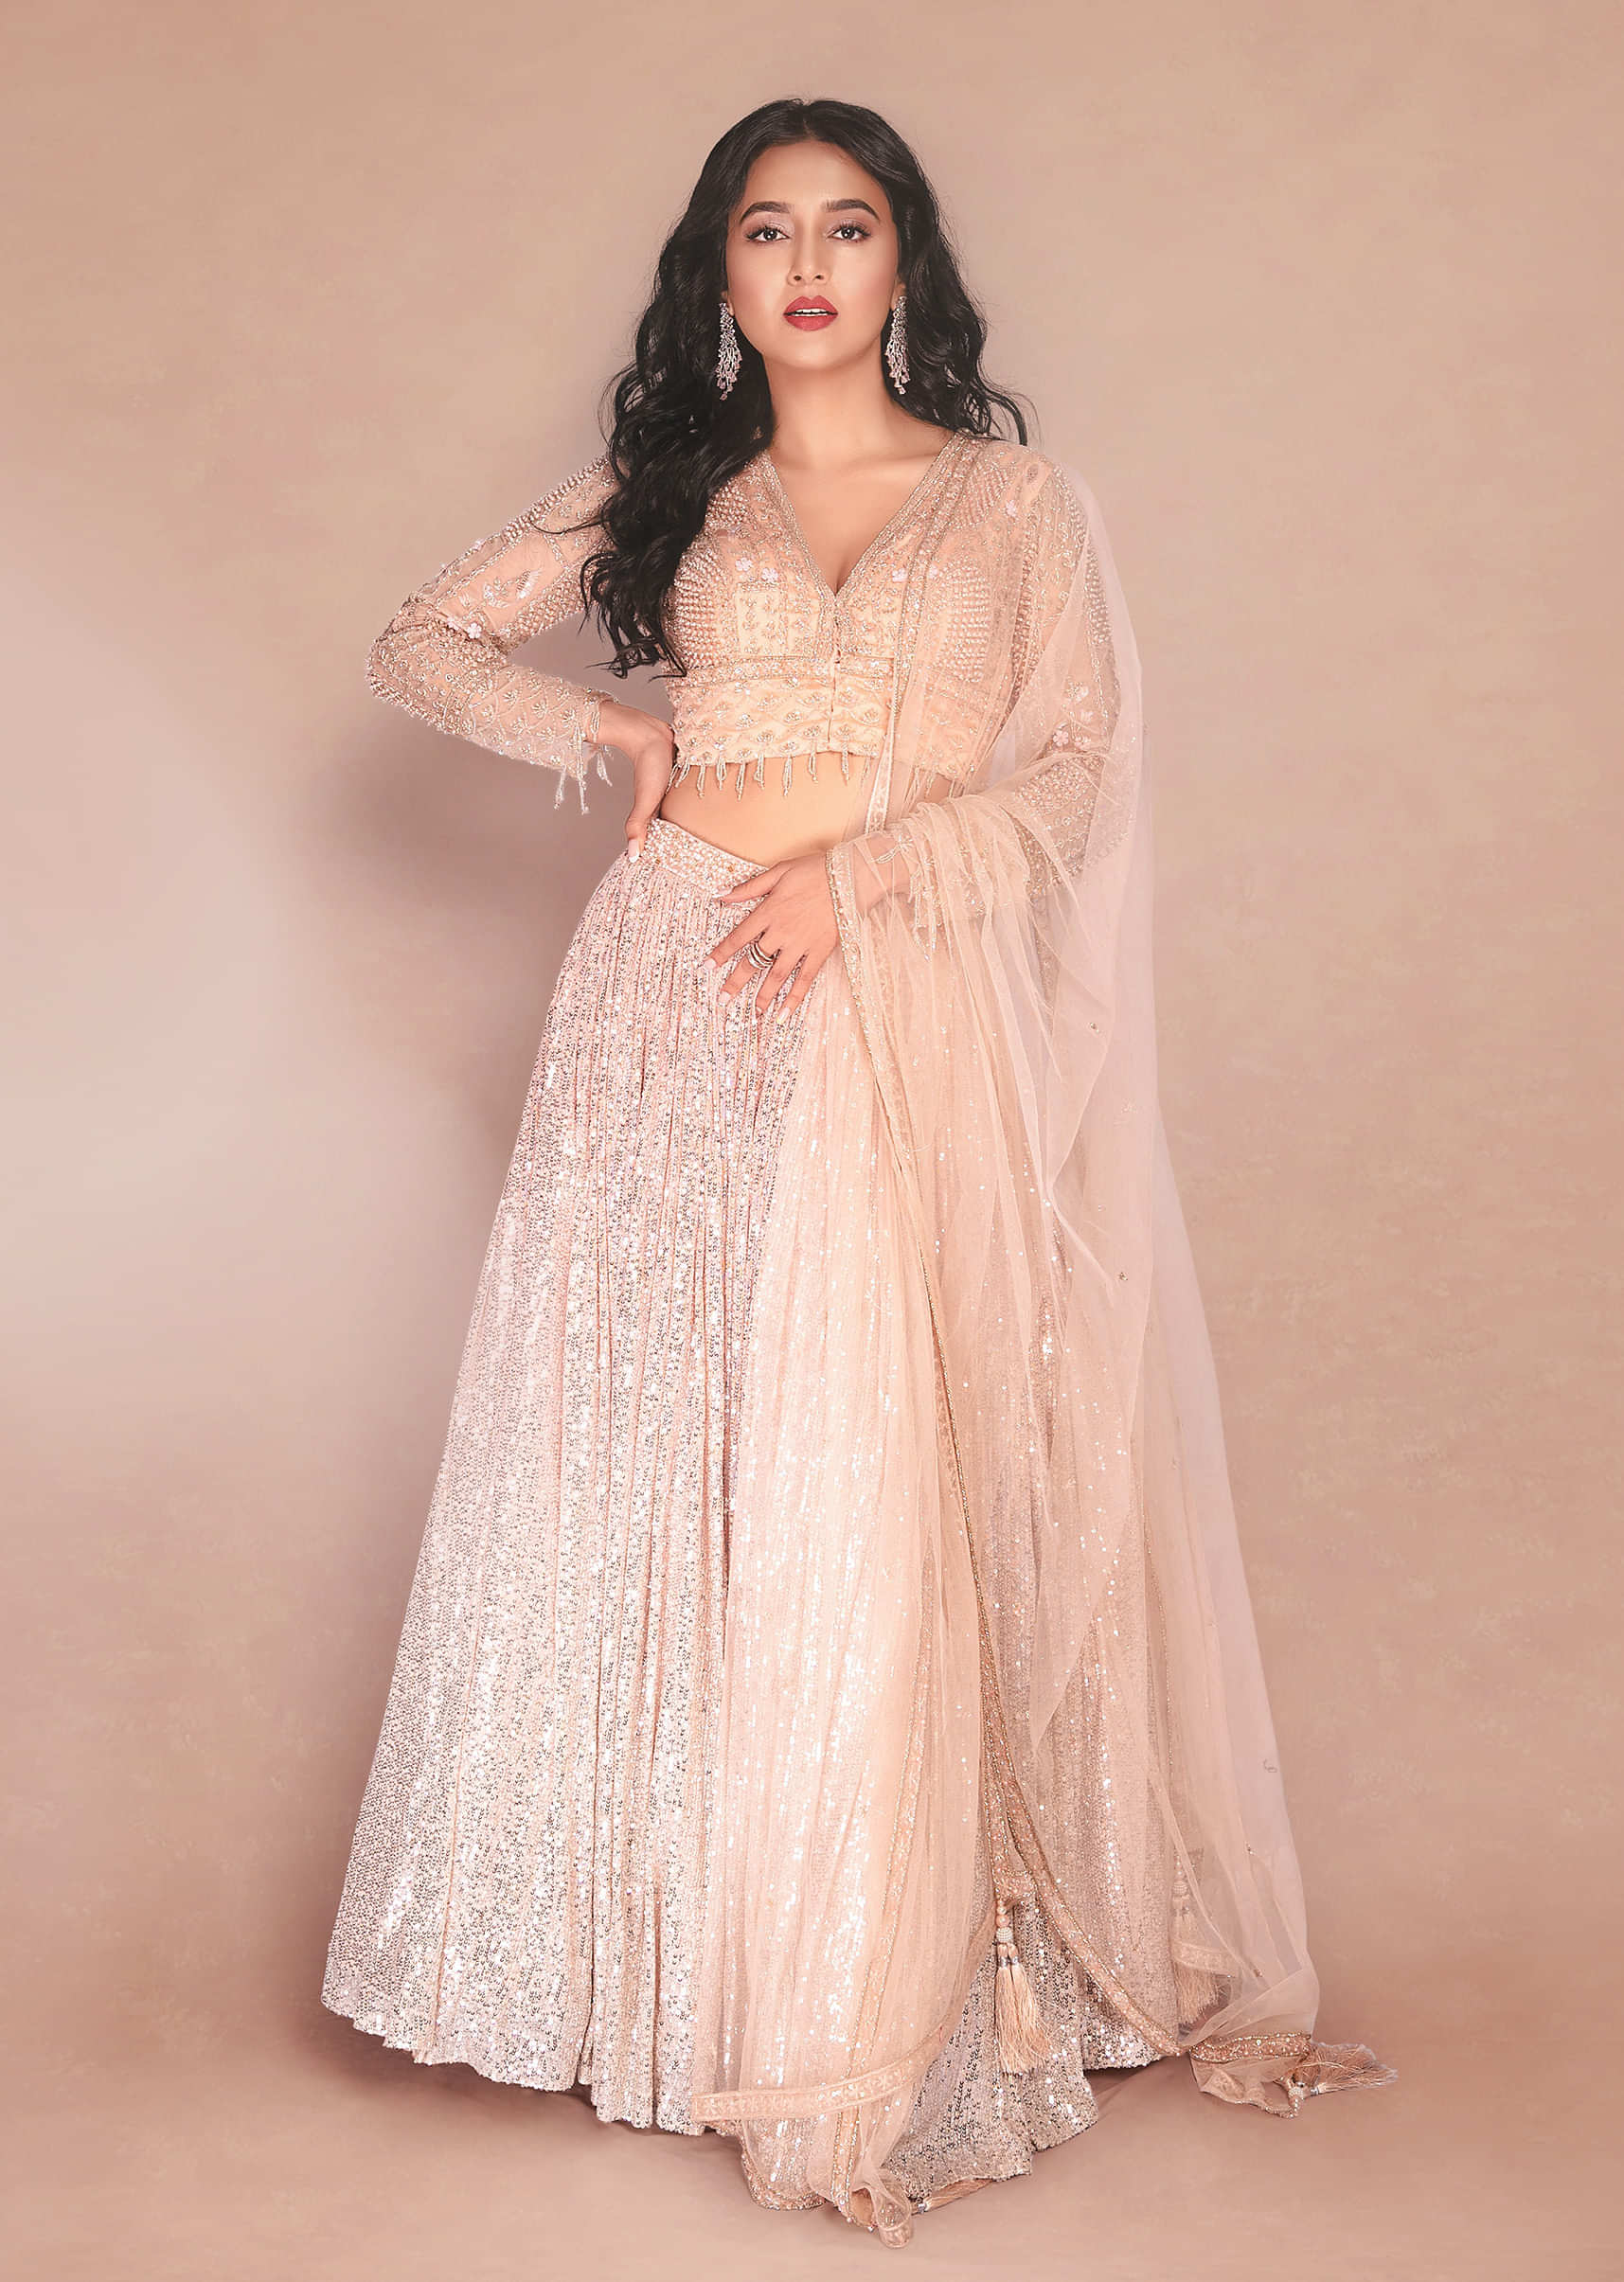 Peach And Silver Ombre Lehenga Embellished In Sequins And Hand Embroidered Choli With Plunging V Neckline